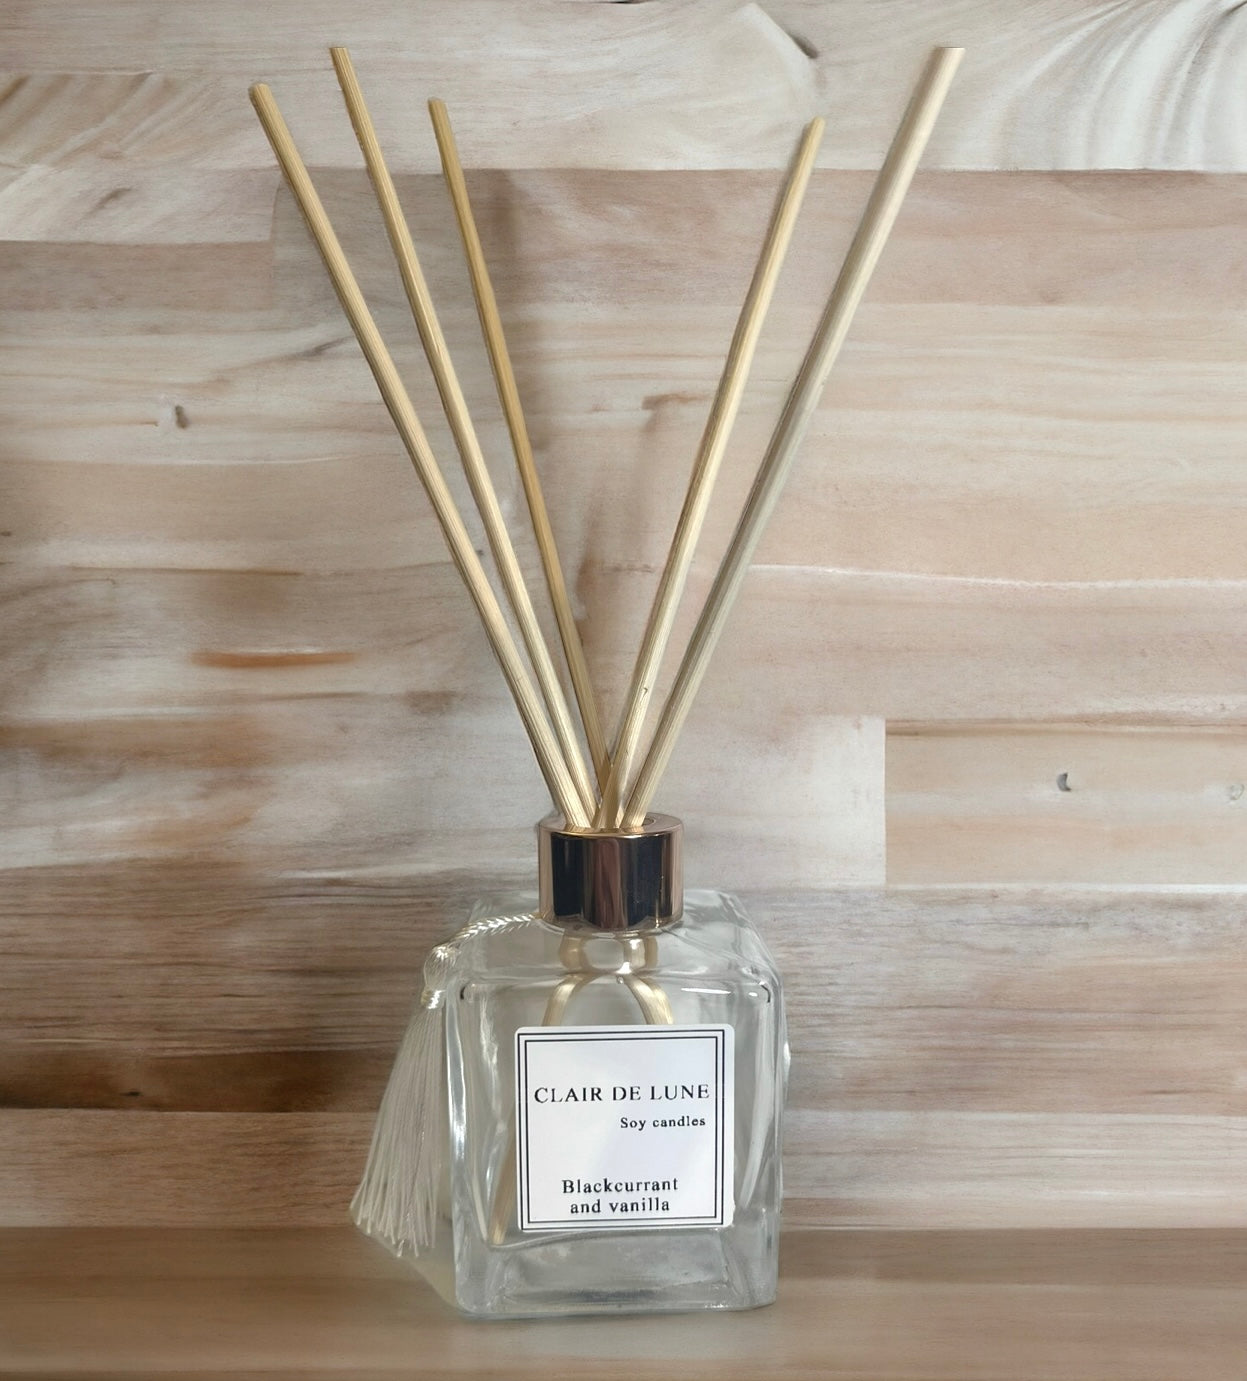 1 million by Paco Rabanne dupe - Diffusers